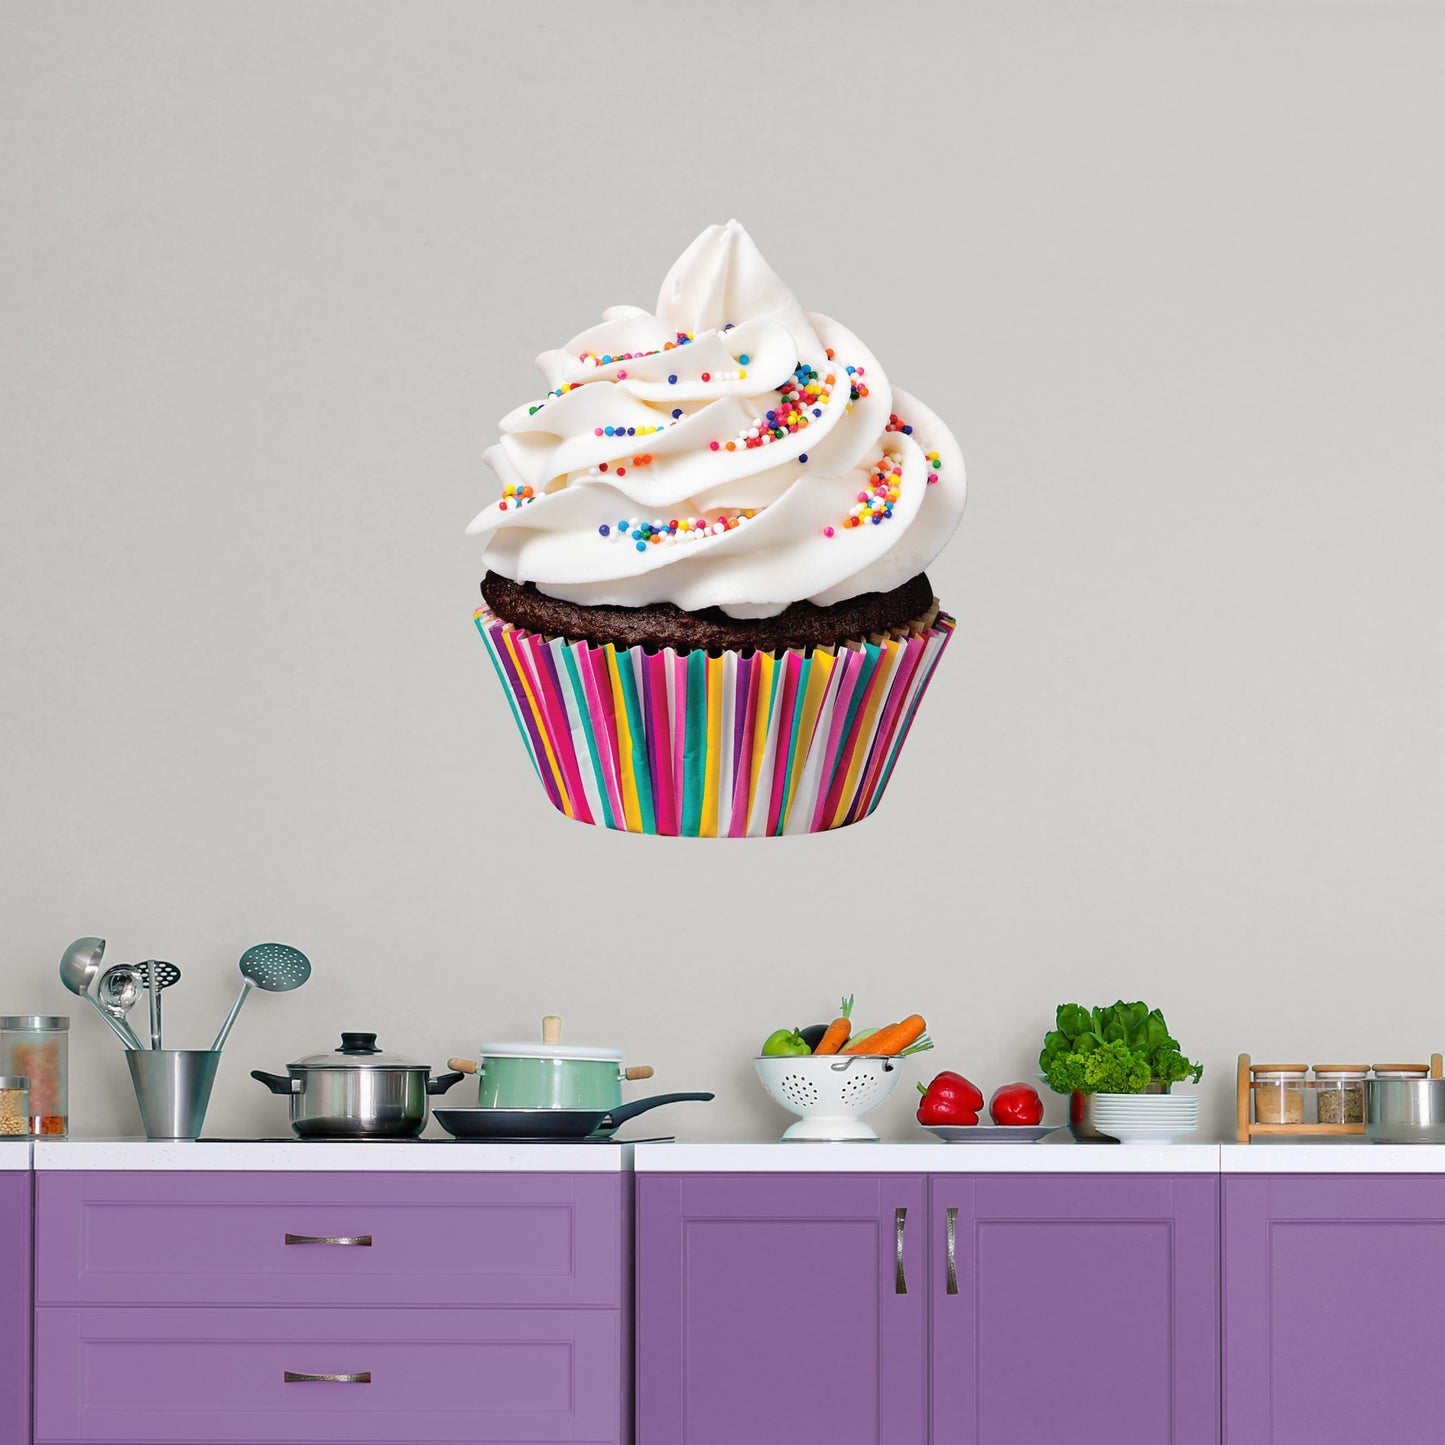 Giant Cupcake + 2 Decals (30"W x 37"H)